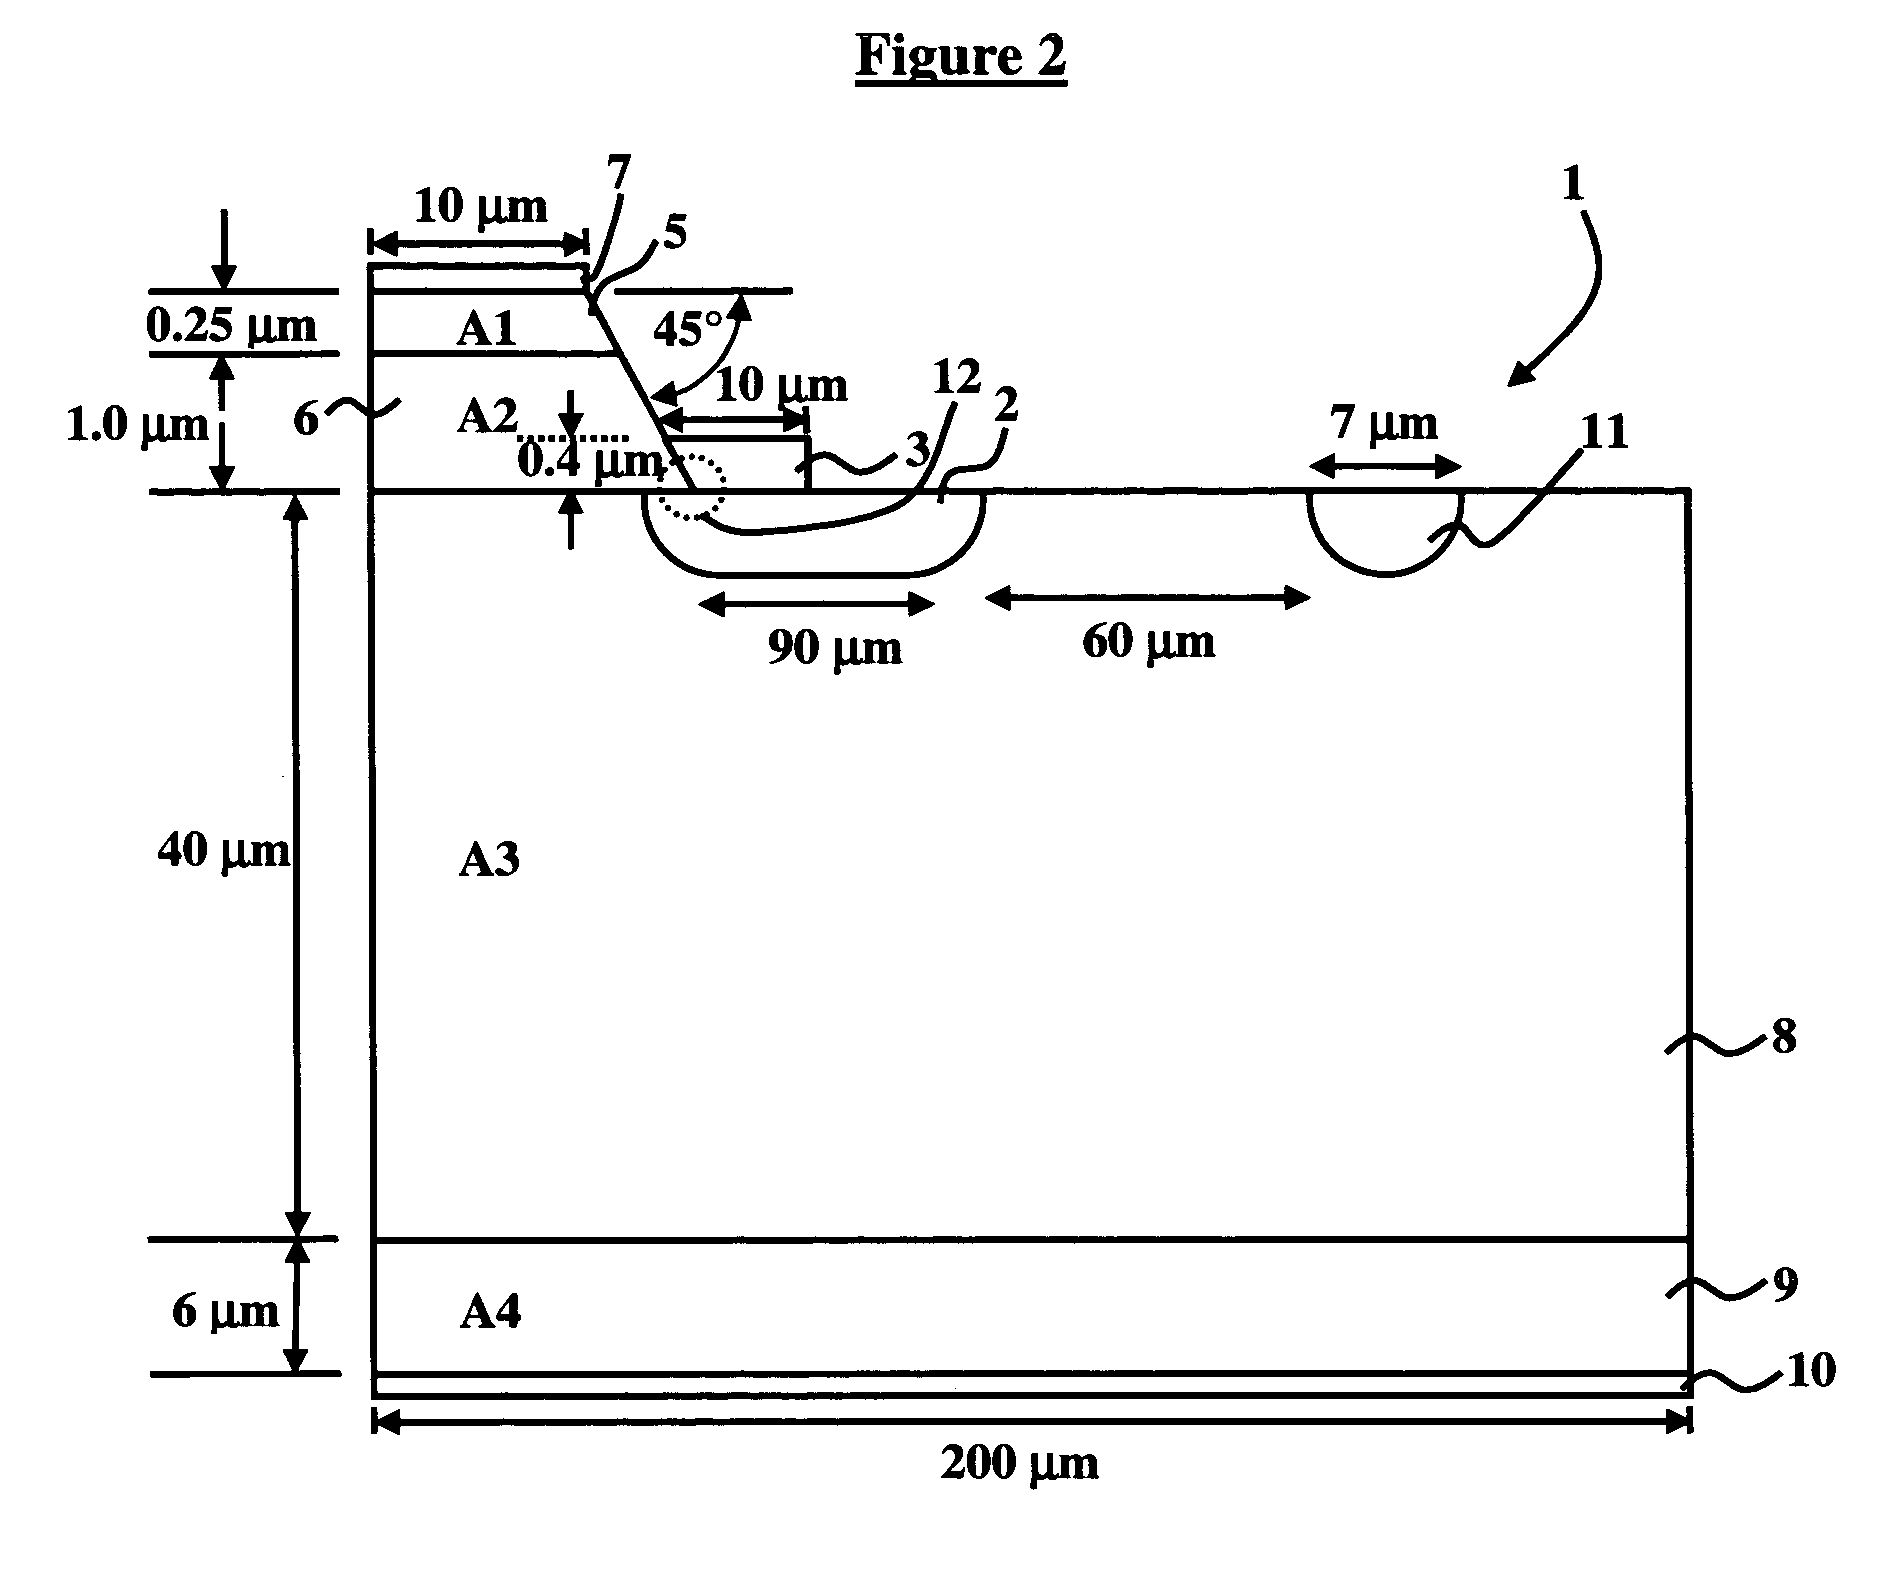 Interacting current spreader and junction extender to increase the voltage blocked in the off state of a high power semiconductor device